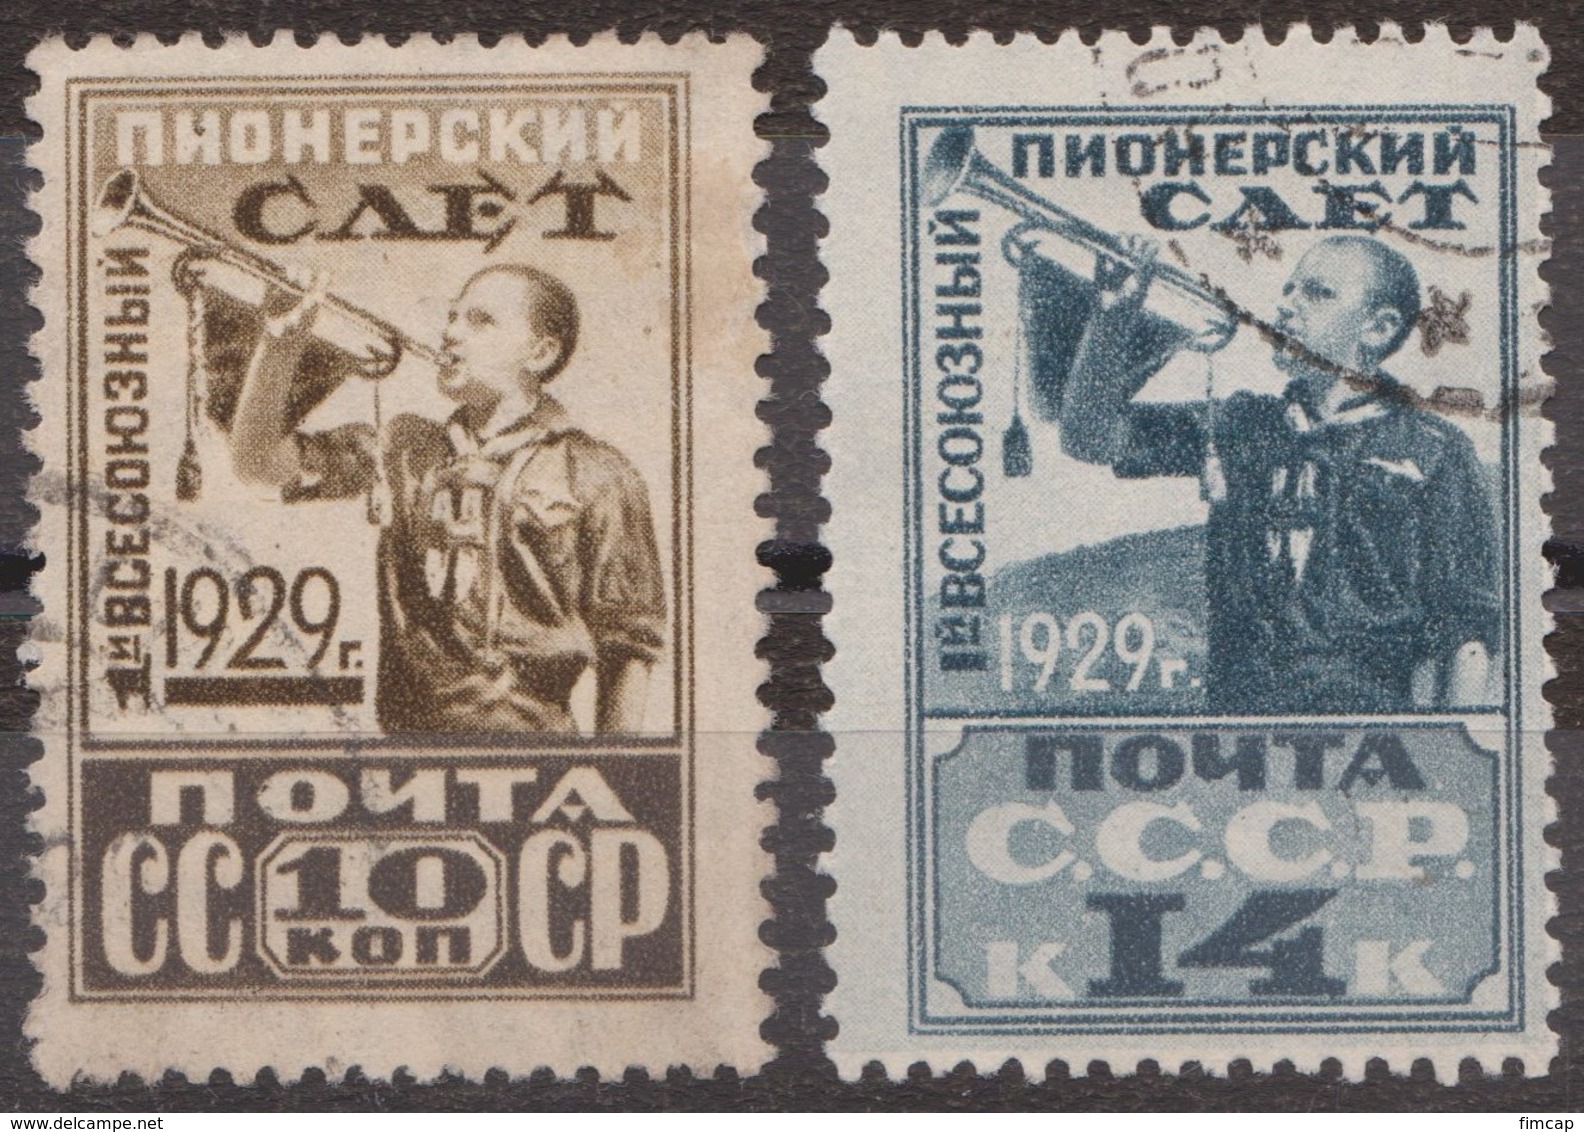 Russia 1929 Mi 363-364 Used - Used Stamps